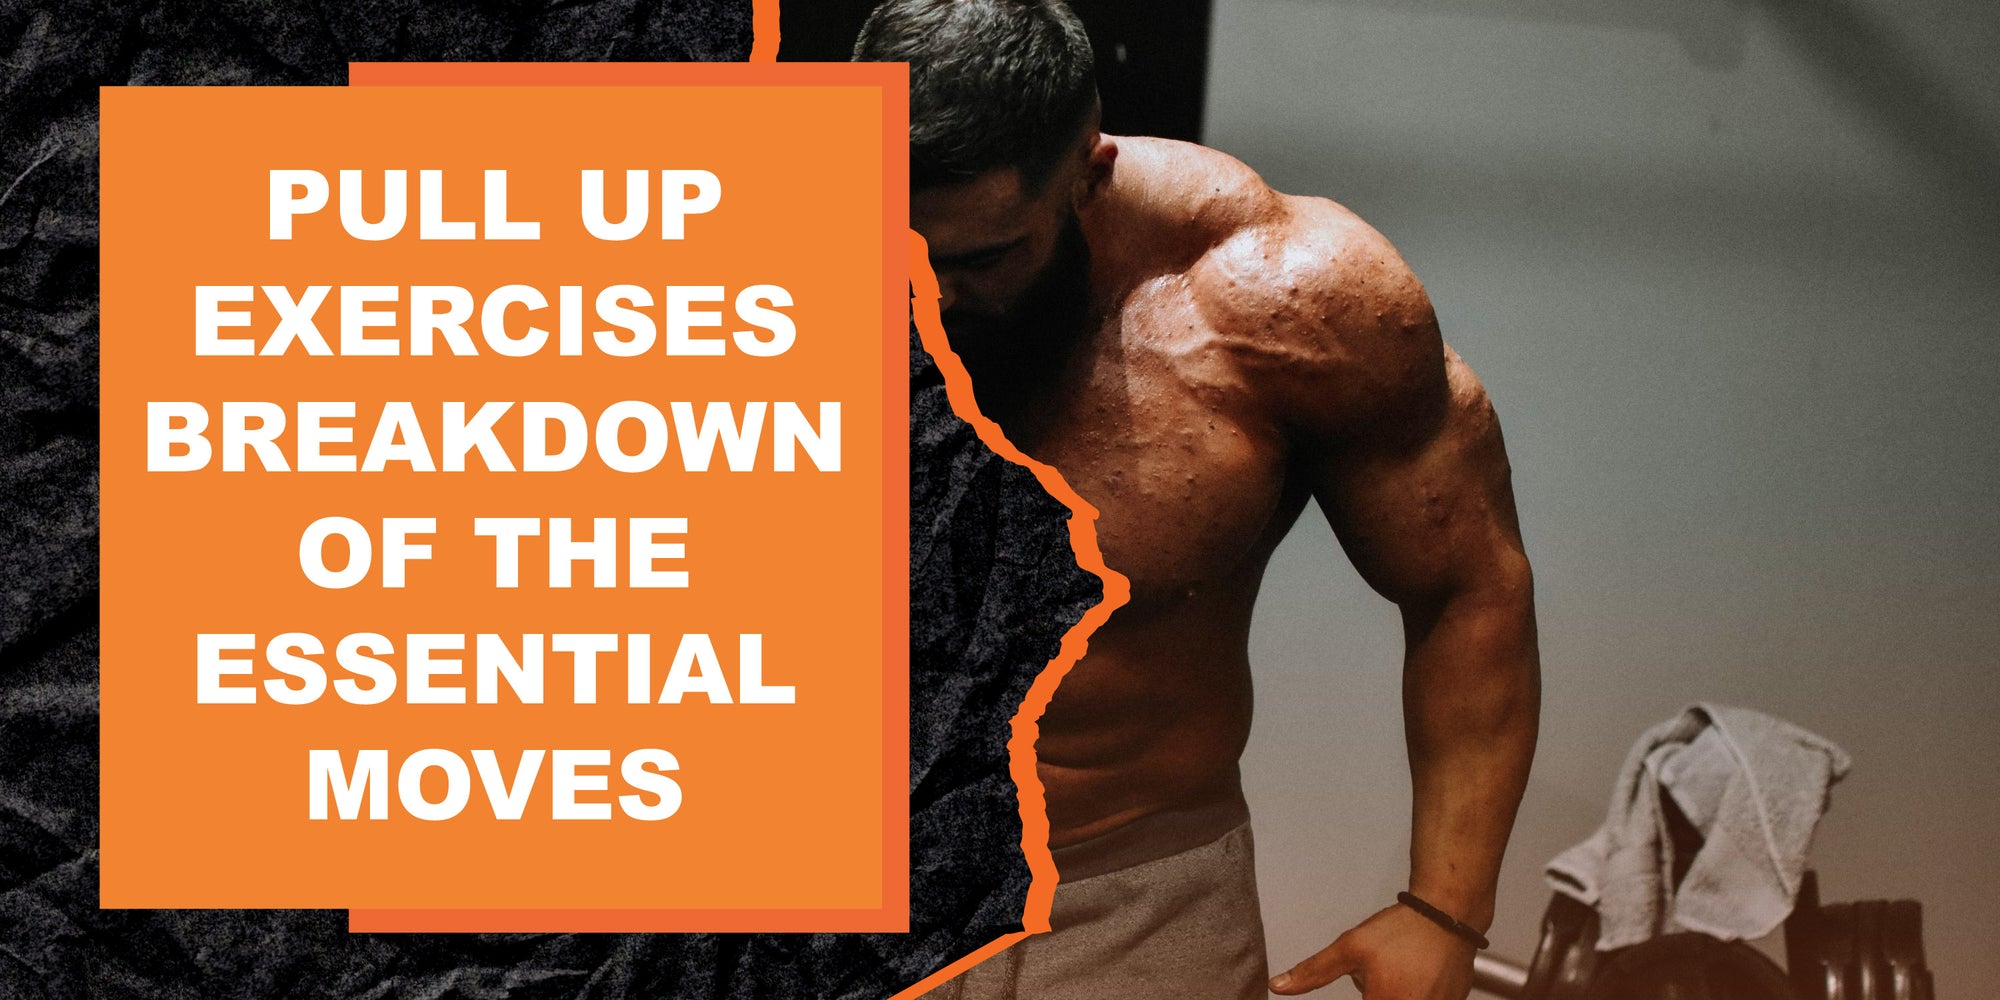 Pull Up Exercises: A Breakdown of the Five Essential Moves